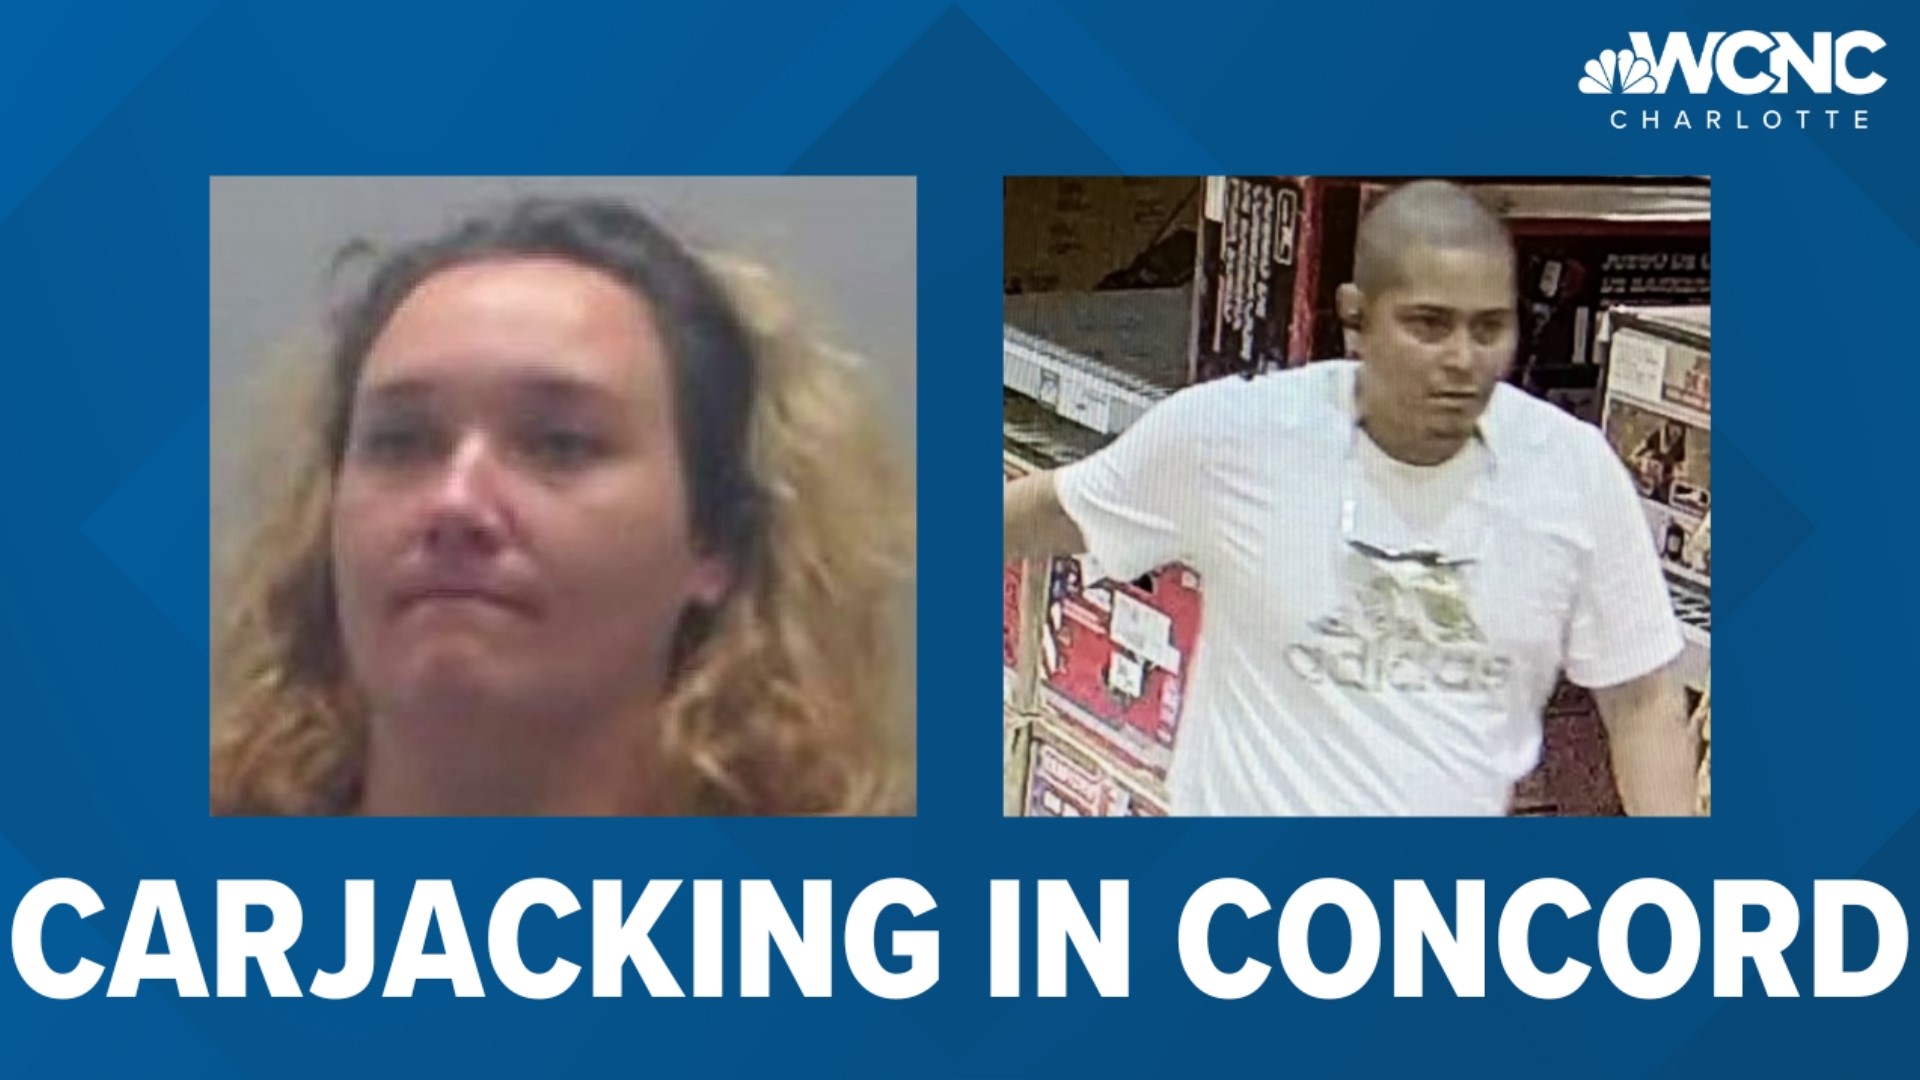 Concord Nc Carjacking Suspects Sought